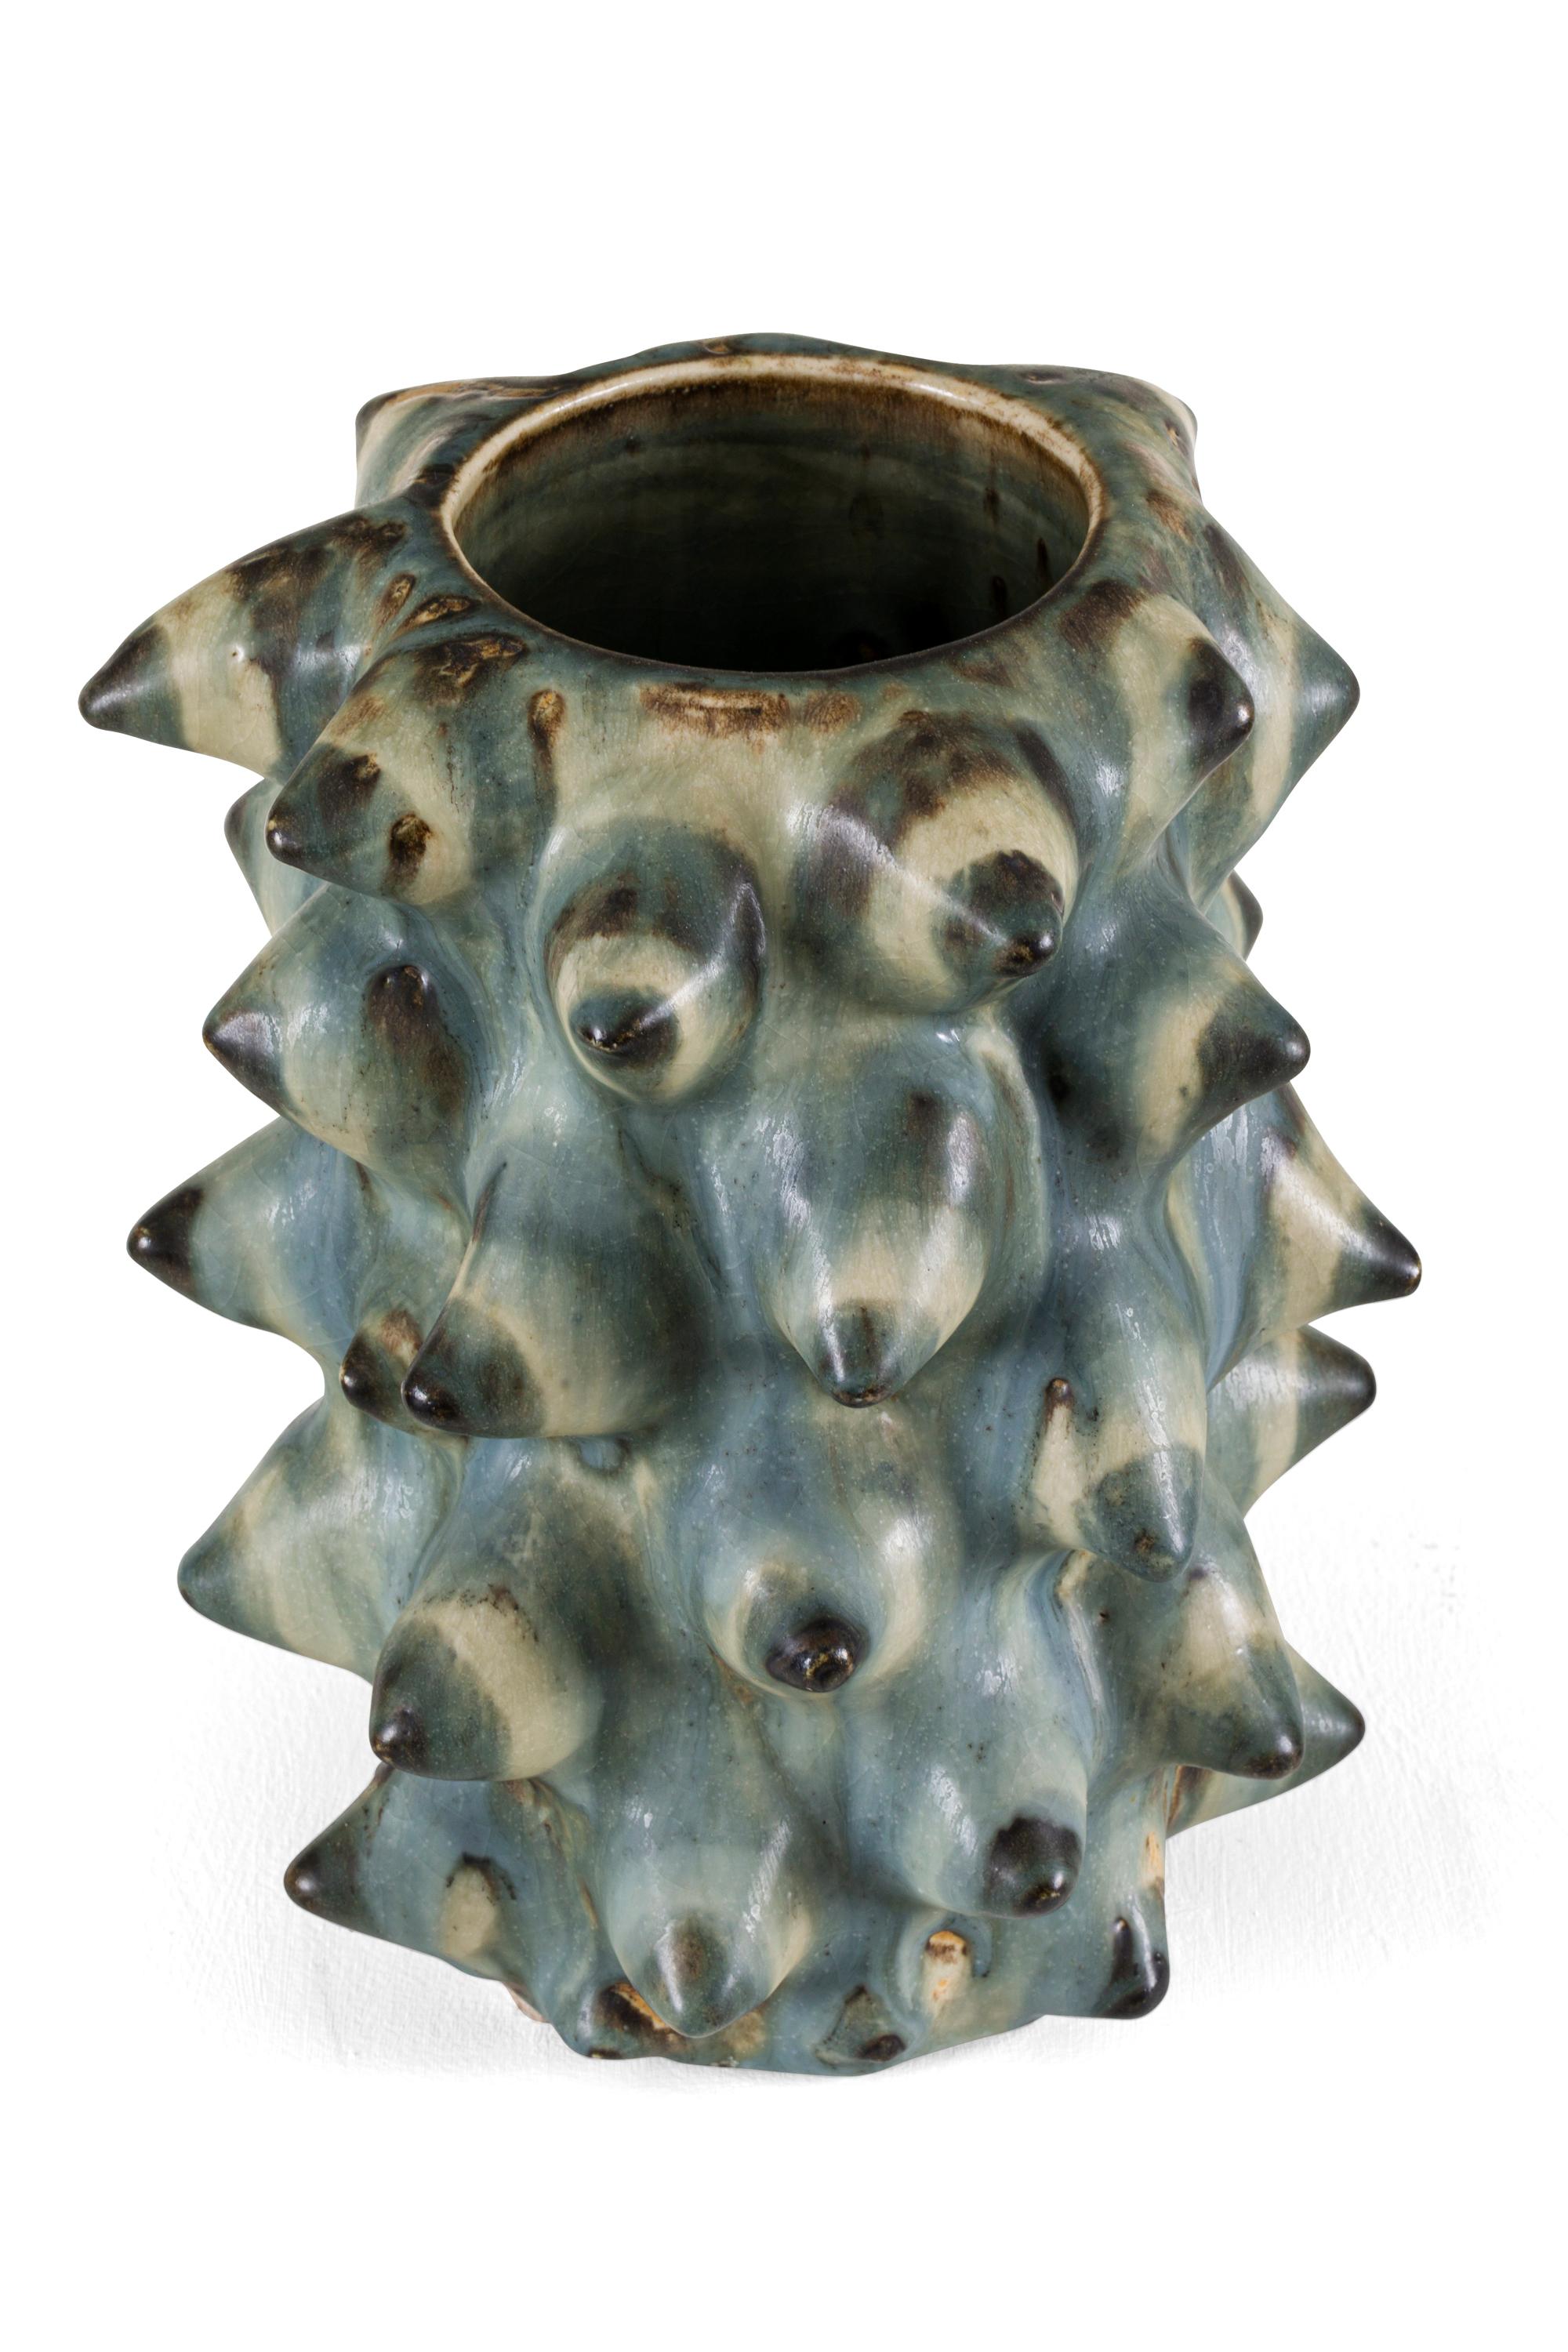 Salto experimented with unusually rich glazes and organic shapes. The sprouting style was a reflection of naturally growing plants. Salto used Chinese and classic glazes such as solfatara and sung, among others. This particular vase has an unusually